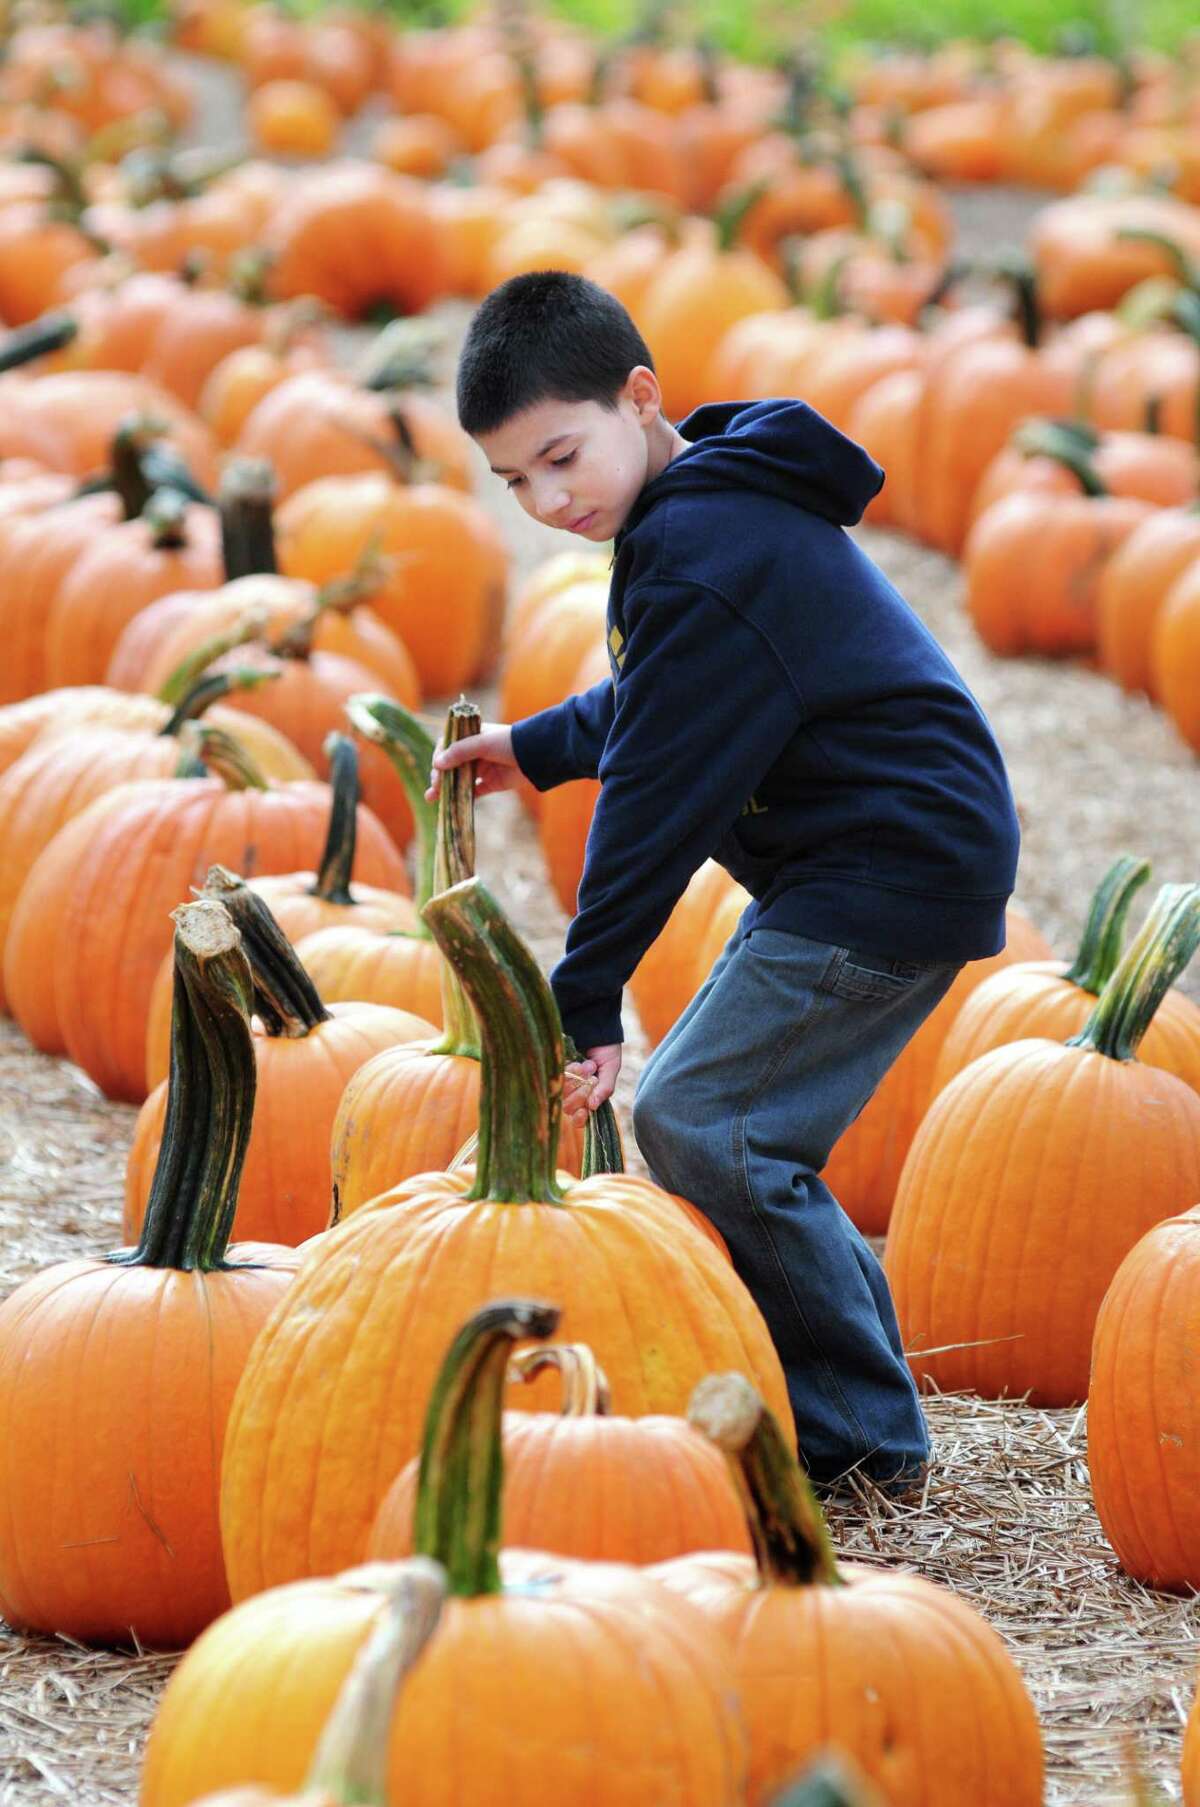 (Arnold Gold Ñ New Haven Register) Gianni Vazquez, 10, of Waterbury looks for a good pumpkin at Jones Family Farms' Pumpkinseed Hill Farm in Shelton on 10/7/2013.